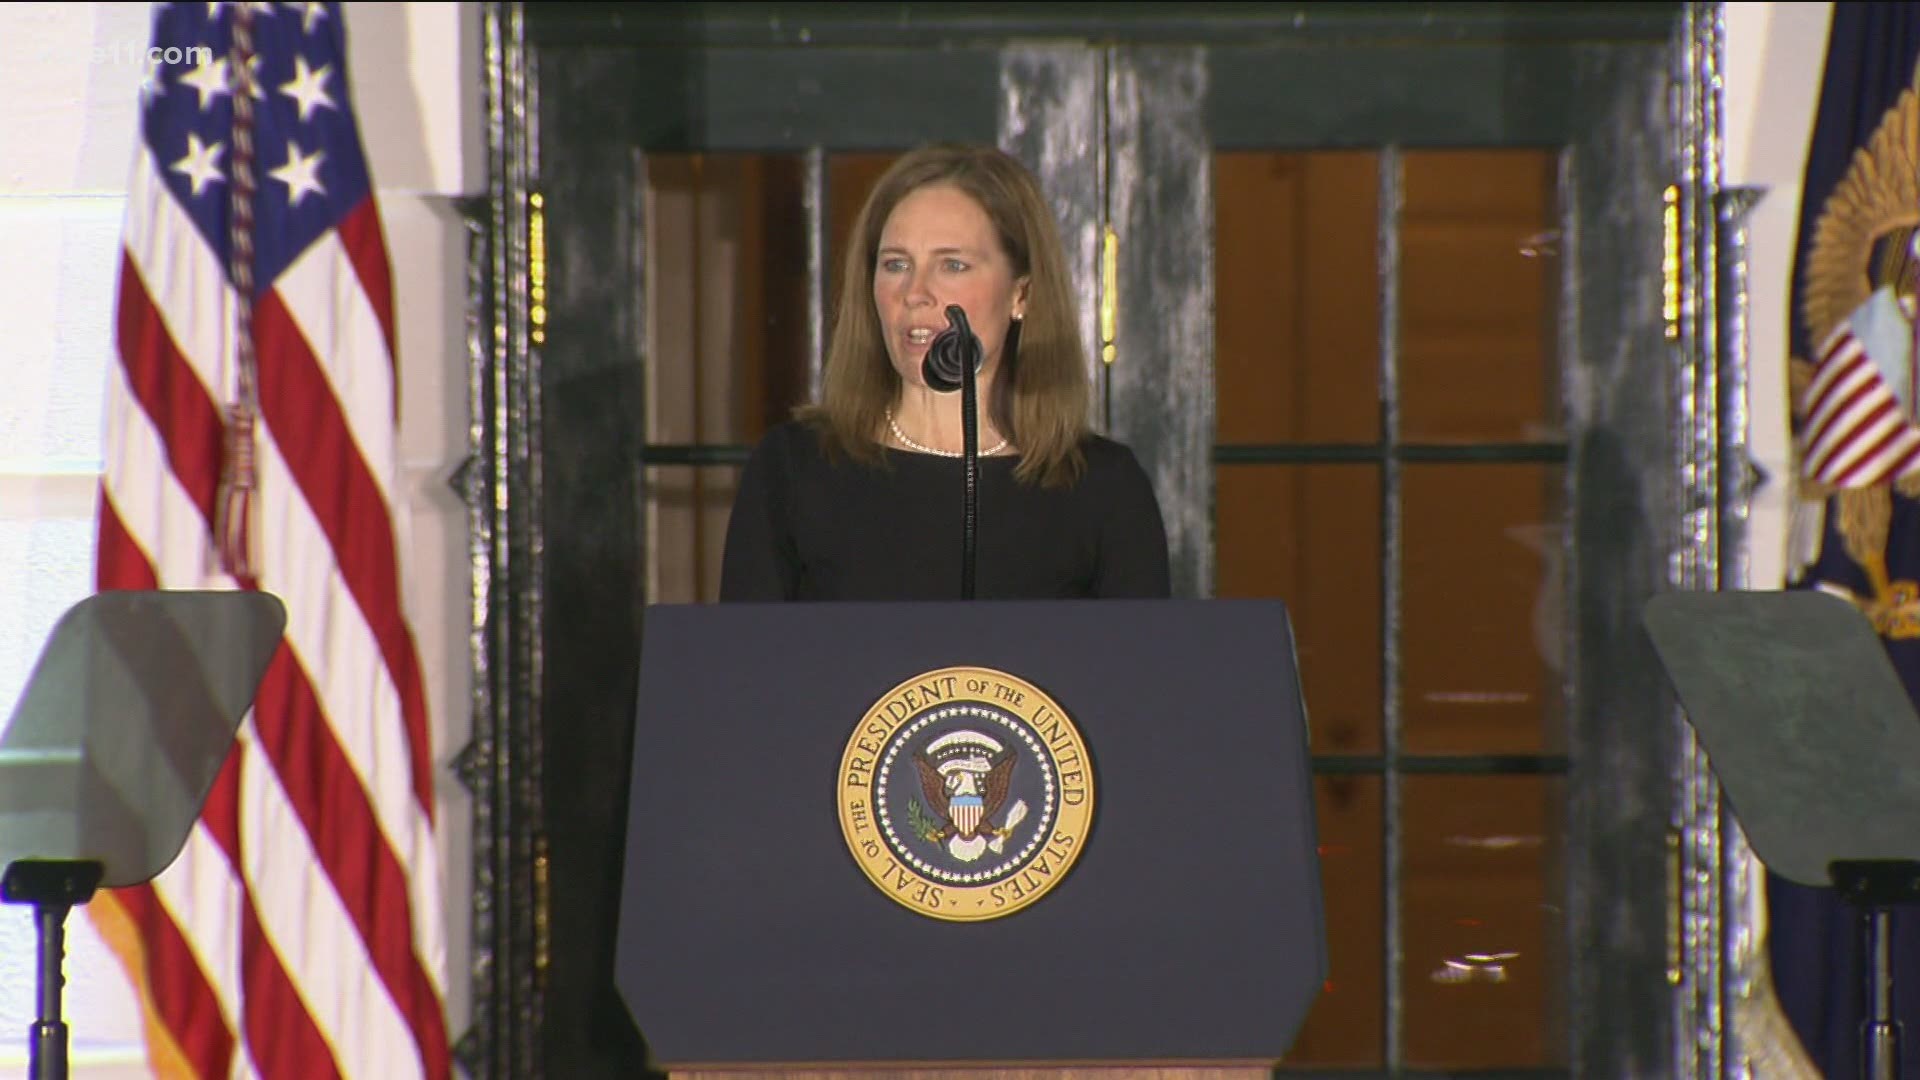 Amy Coney Barrett was unofficially sworn in Monday night as a justice of the U.S. Supreme Court, igniting debate as to what her impact will be.